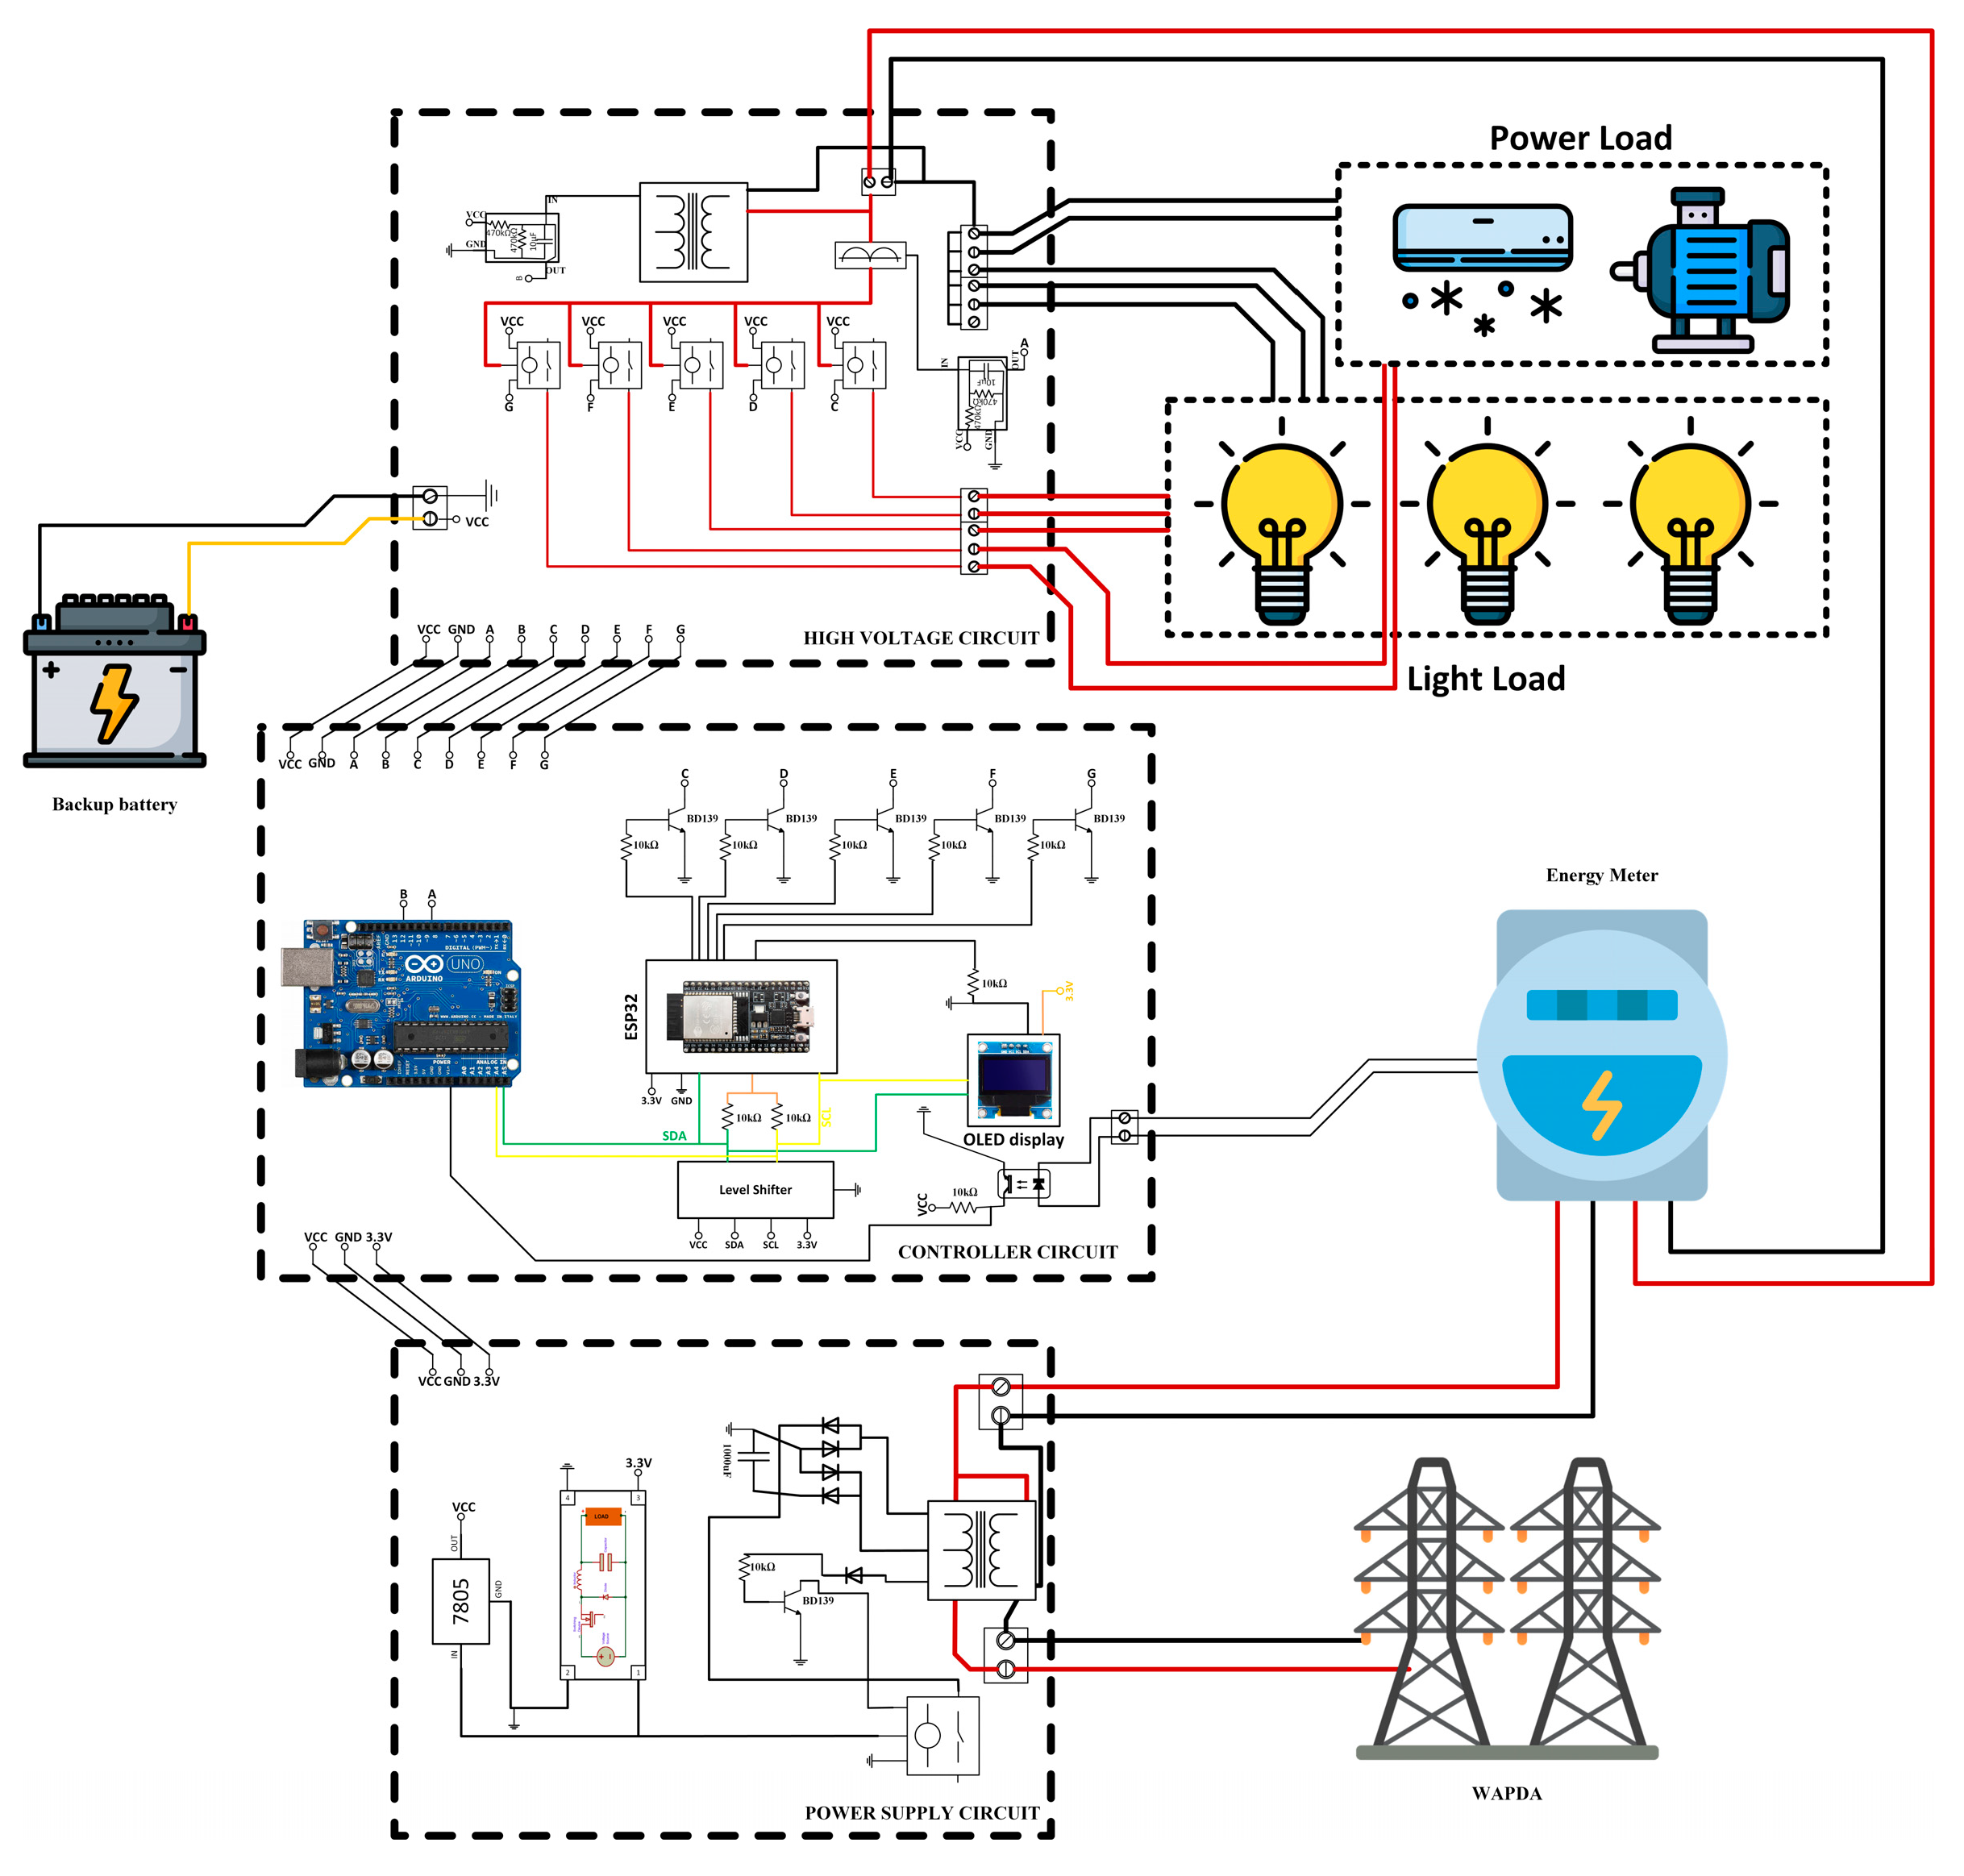 Wiring diagram to power and operate the pump using an Arduino Uno R3.